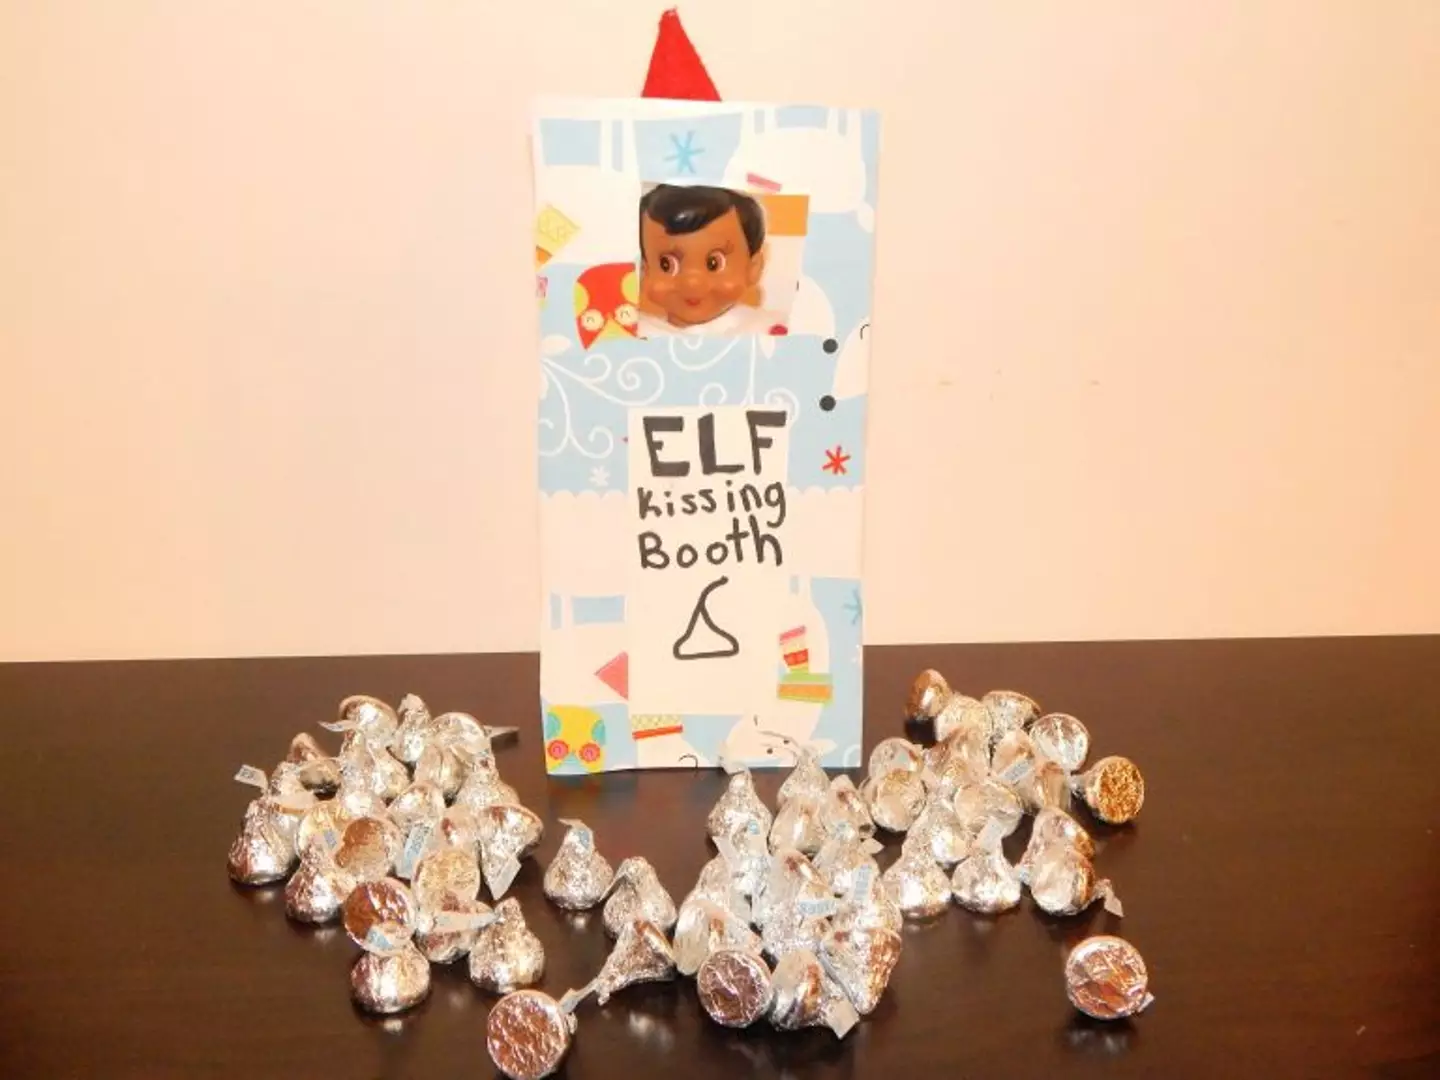 Elf kissing booth. (